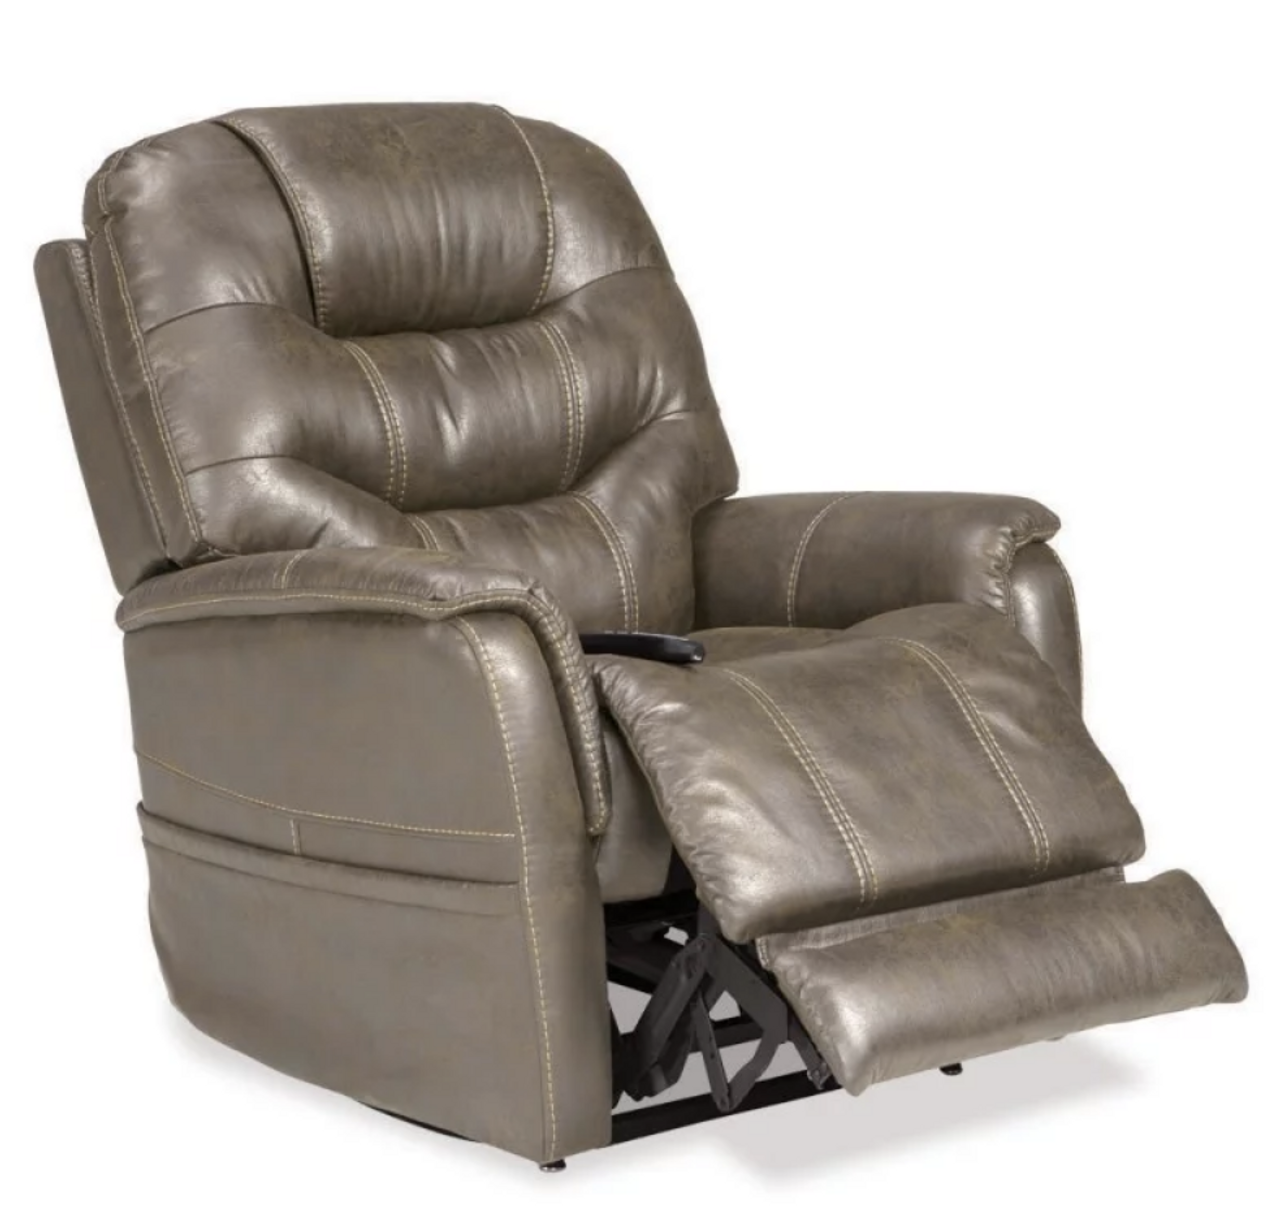 Pride LC-358S Heritage Lift Chair